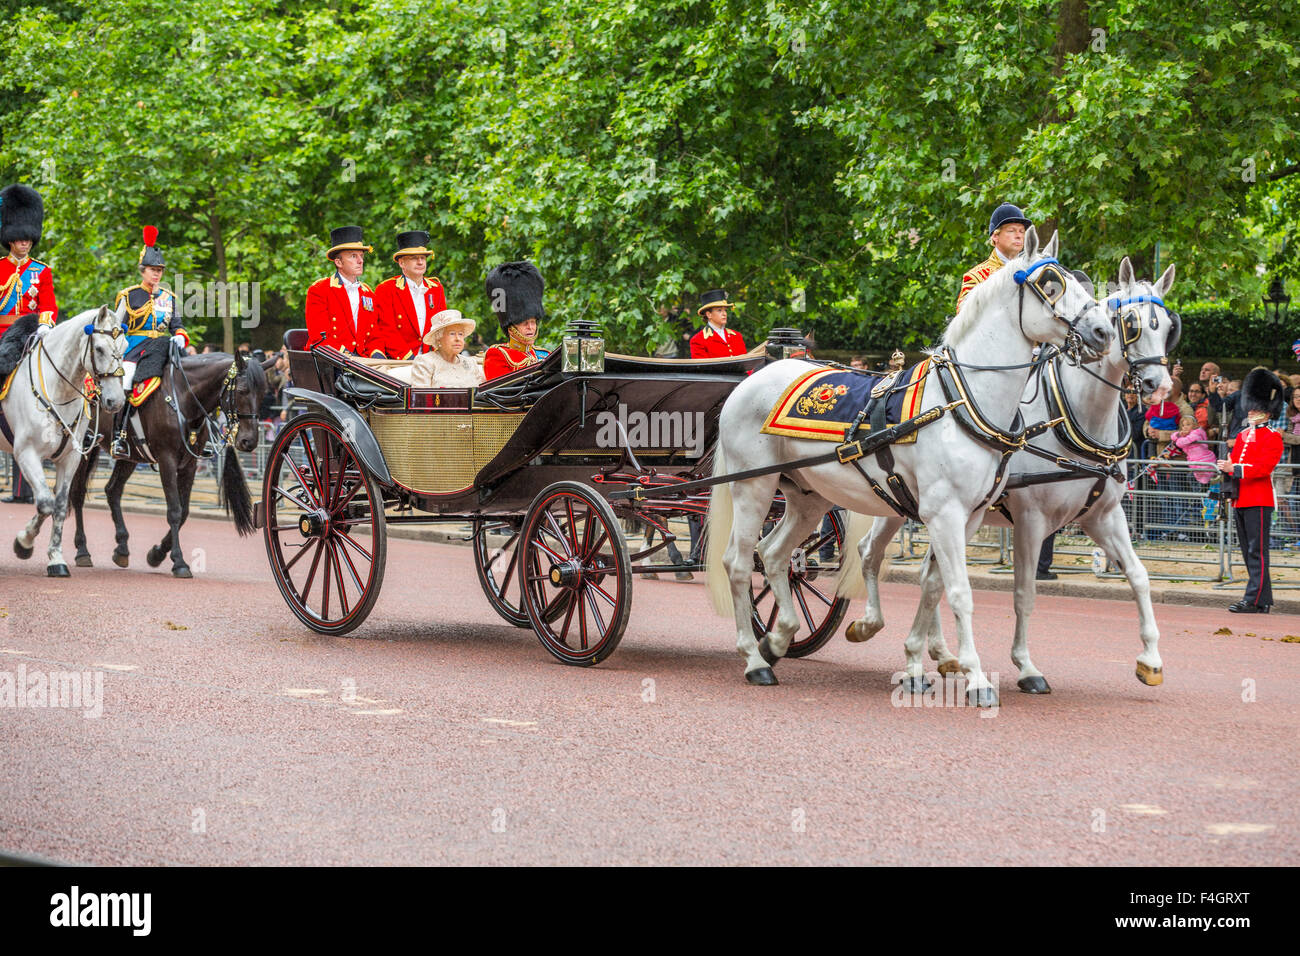 A Carriage carrying The Queen and Prince Philip along The Mall, London England UK 2017 Stock Photo